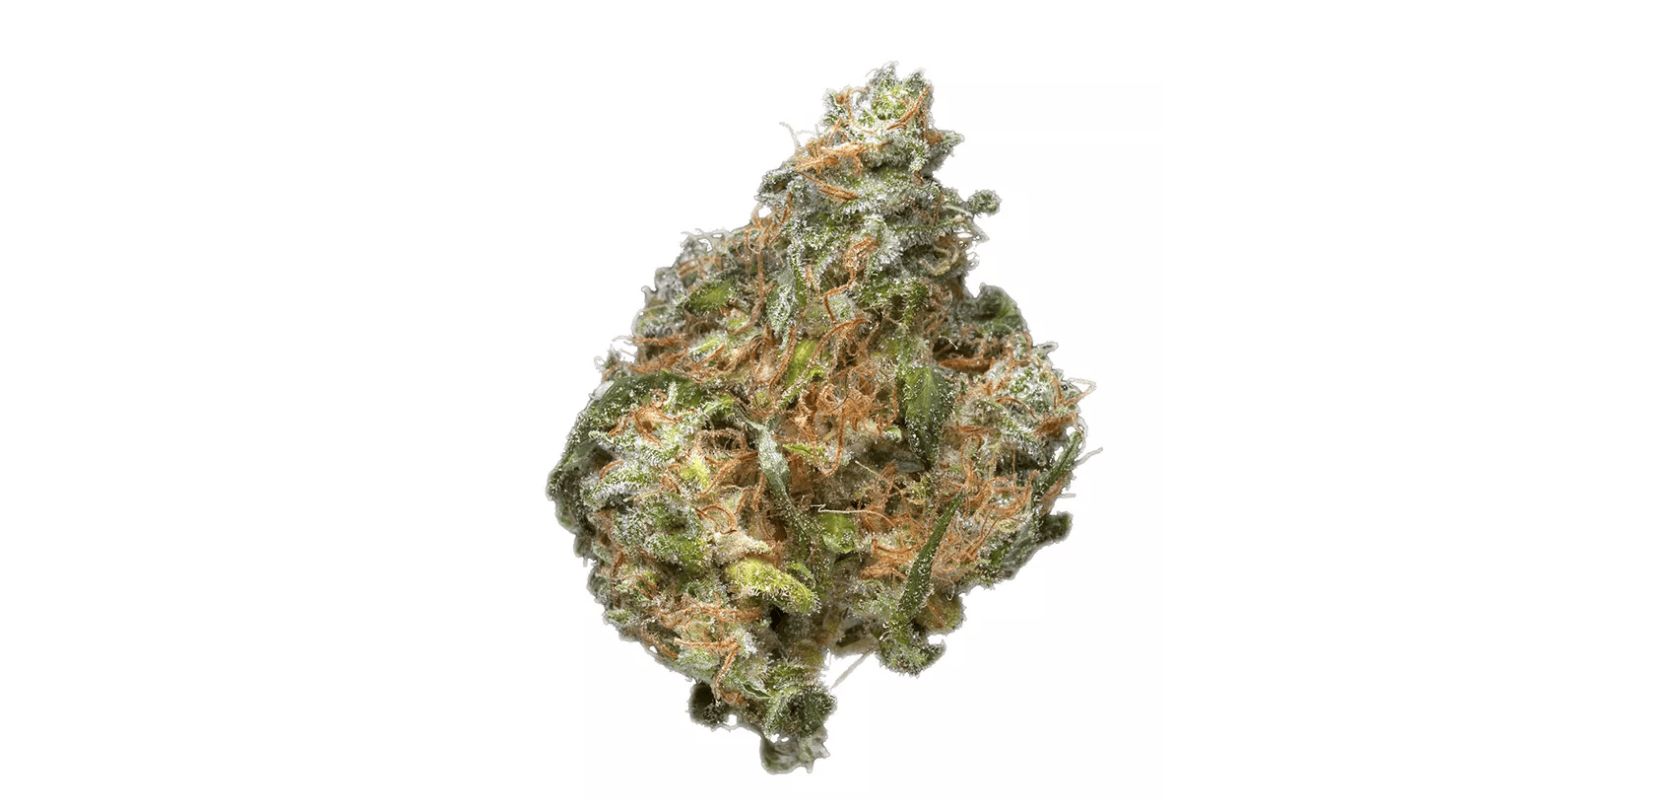 Close your eyes and inhale the aroma of MK Ultra strain, and you'll find yourself transported to a world of earthy enchantment.